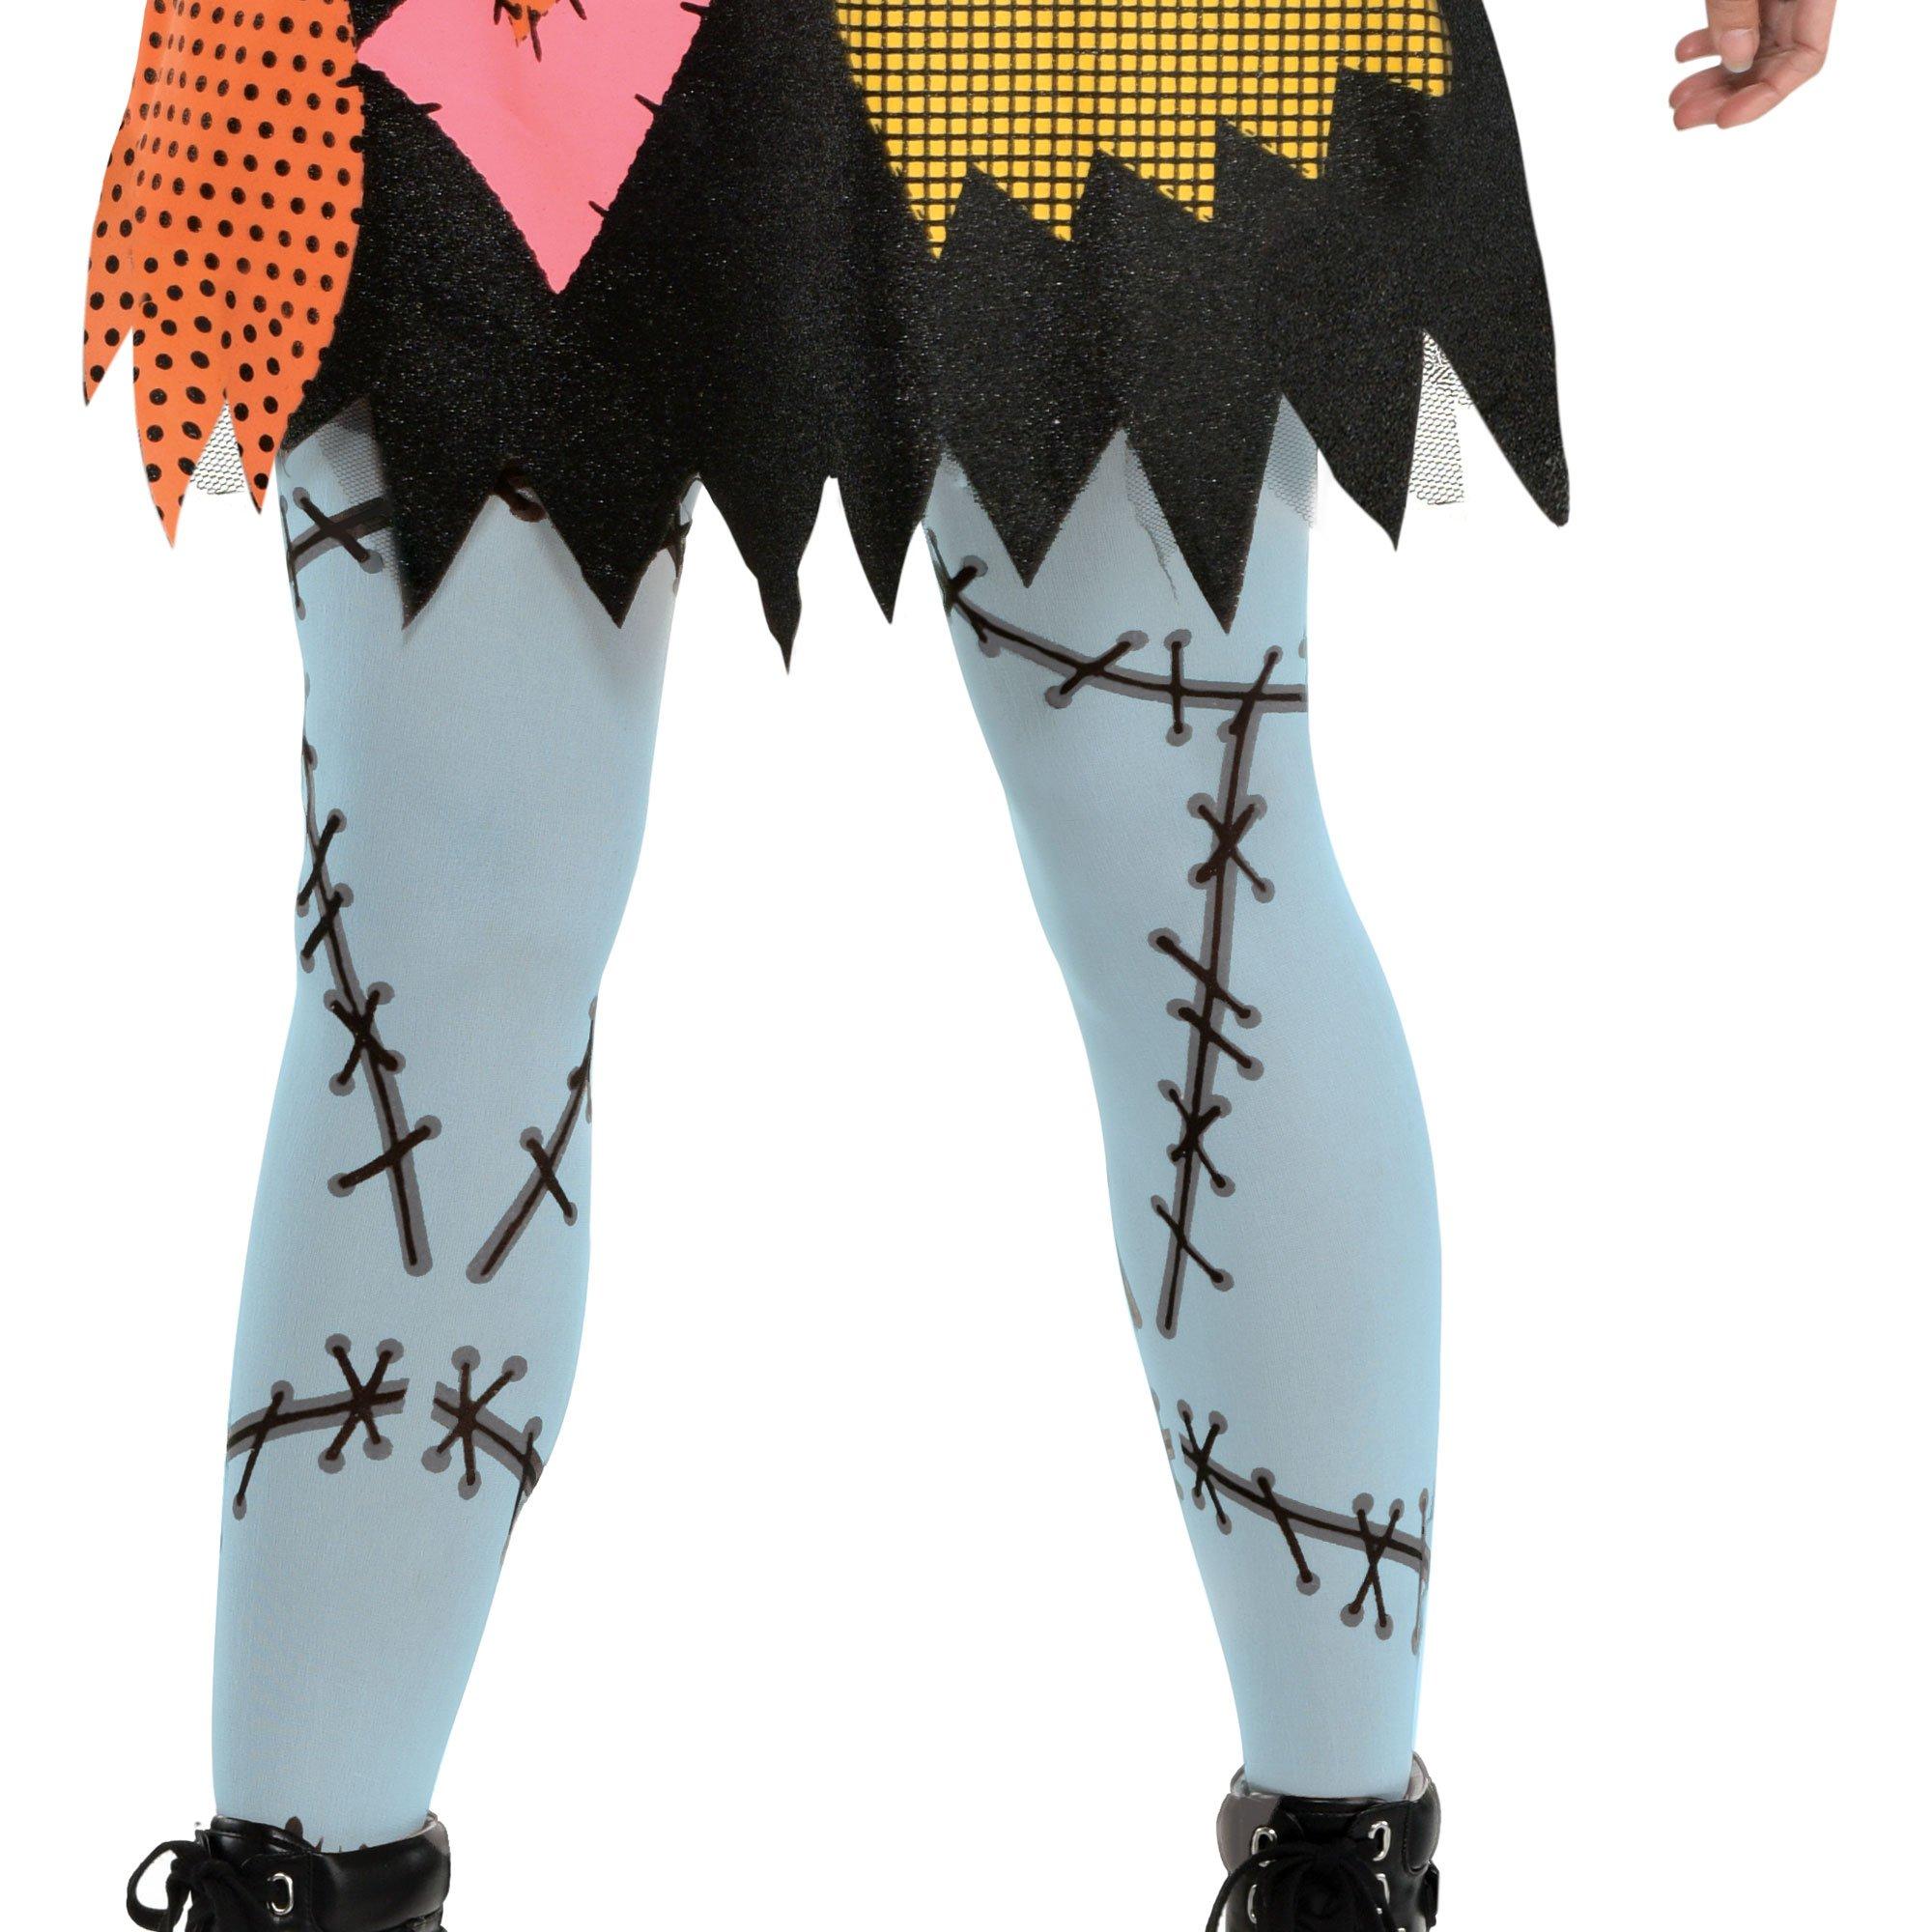 Adult Deluxe Sally Costume - The Nightmare Before Christmas